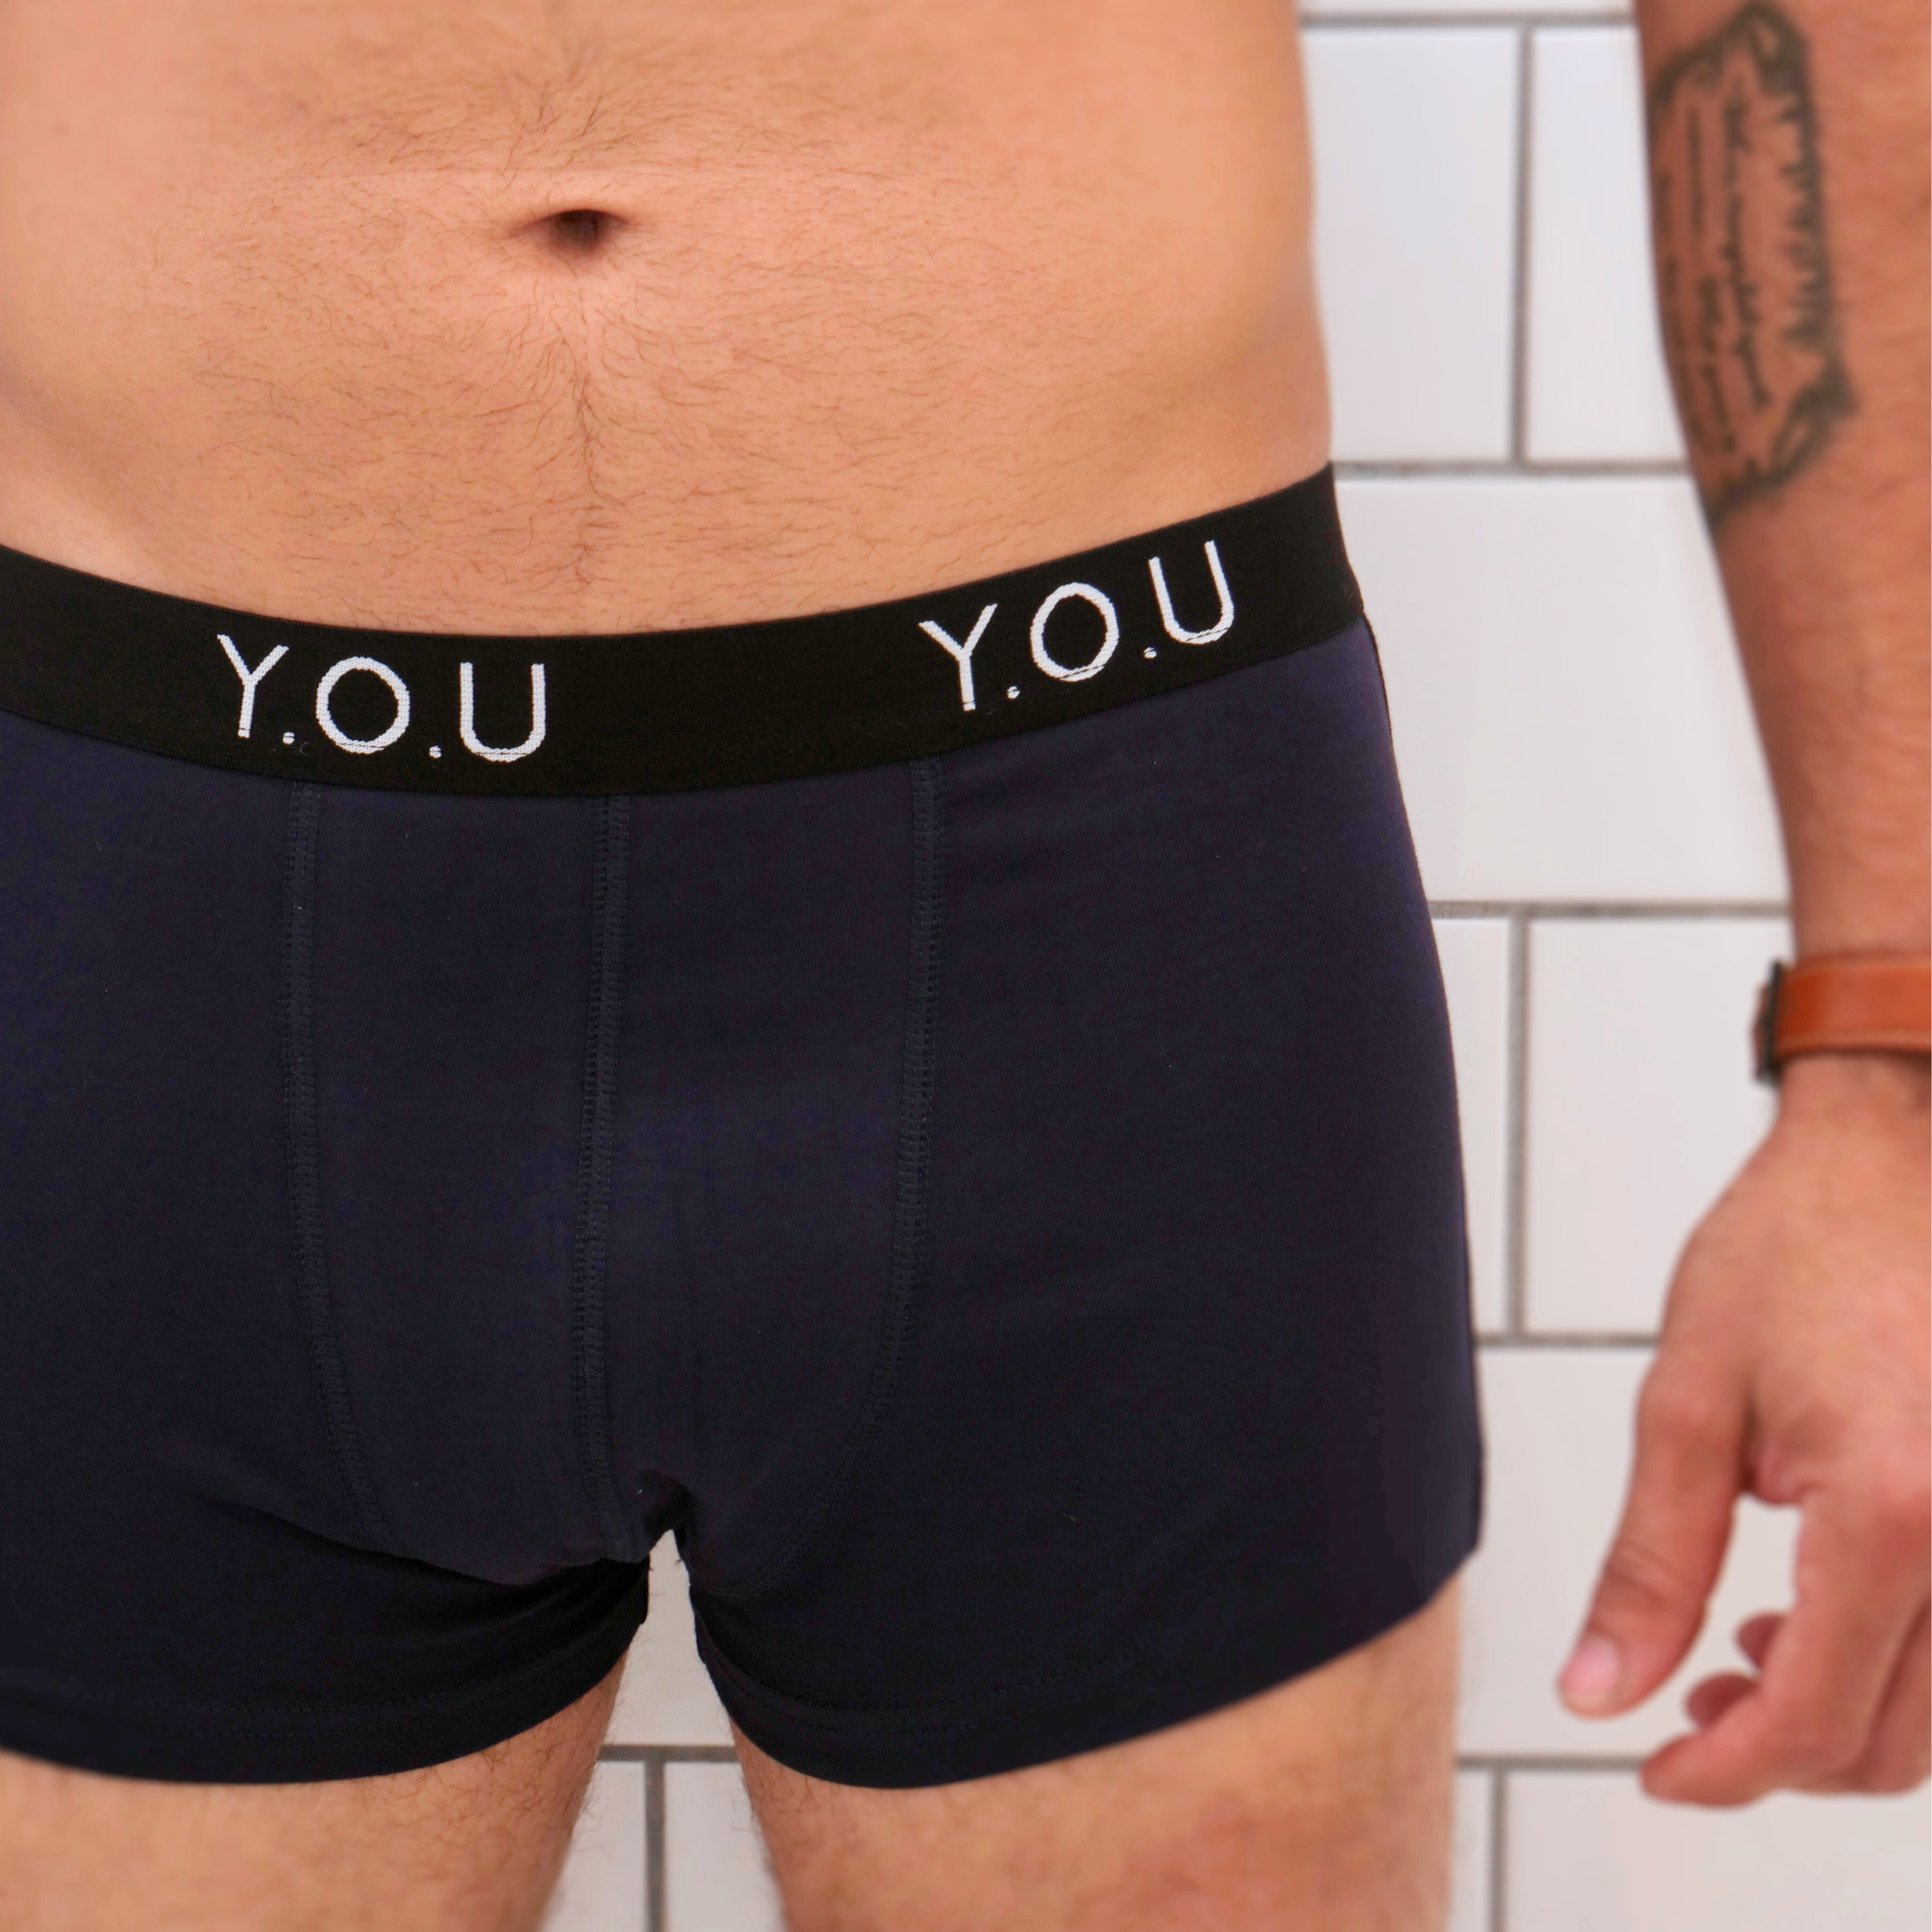 Close-up of a person wearing navy blue men’s hipster trunks with a black waistband that has the letters "Y.O.U" printed on it. The person has a tattoo on their left arm and is wearing a brown wristwatch. They are standing against a tiled wall.